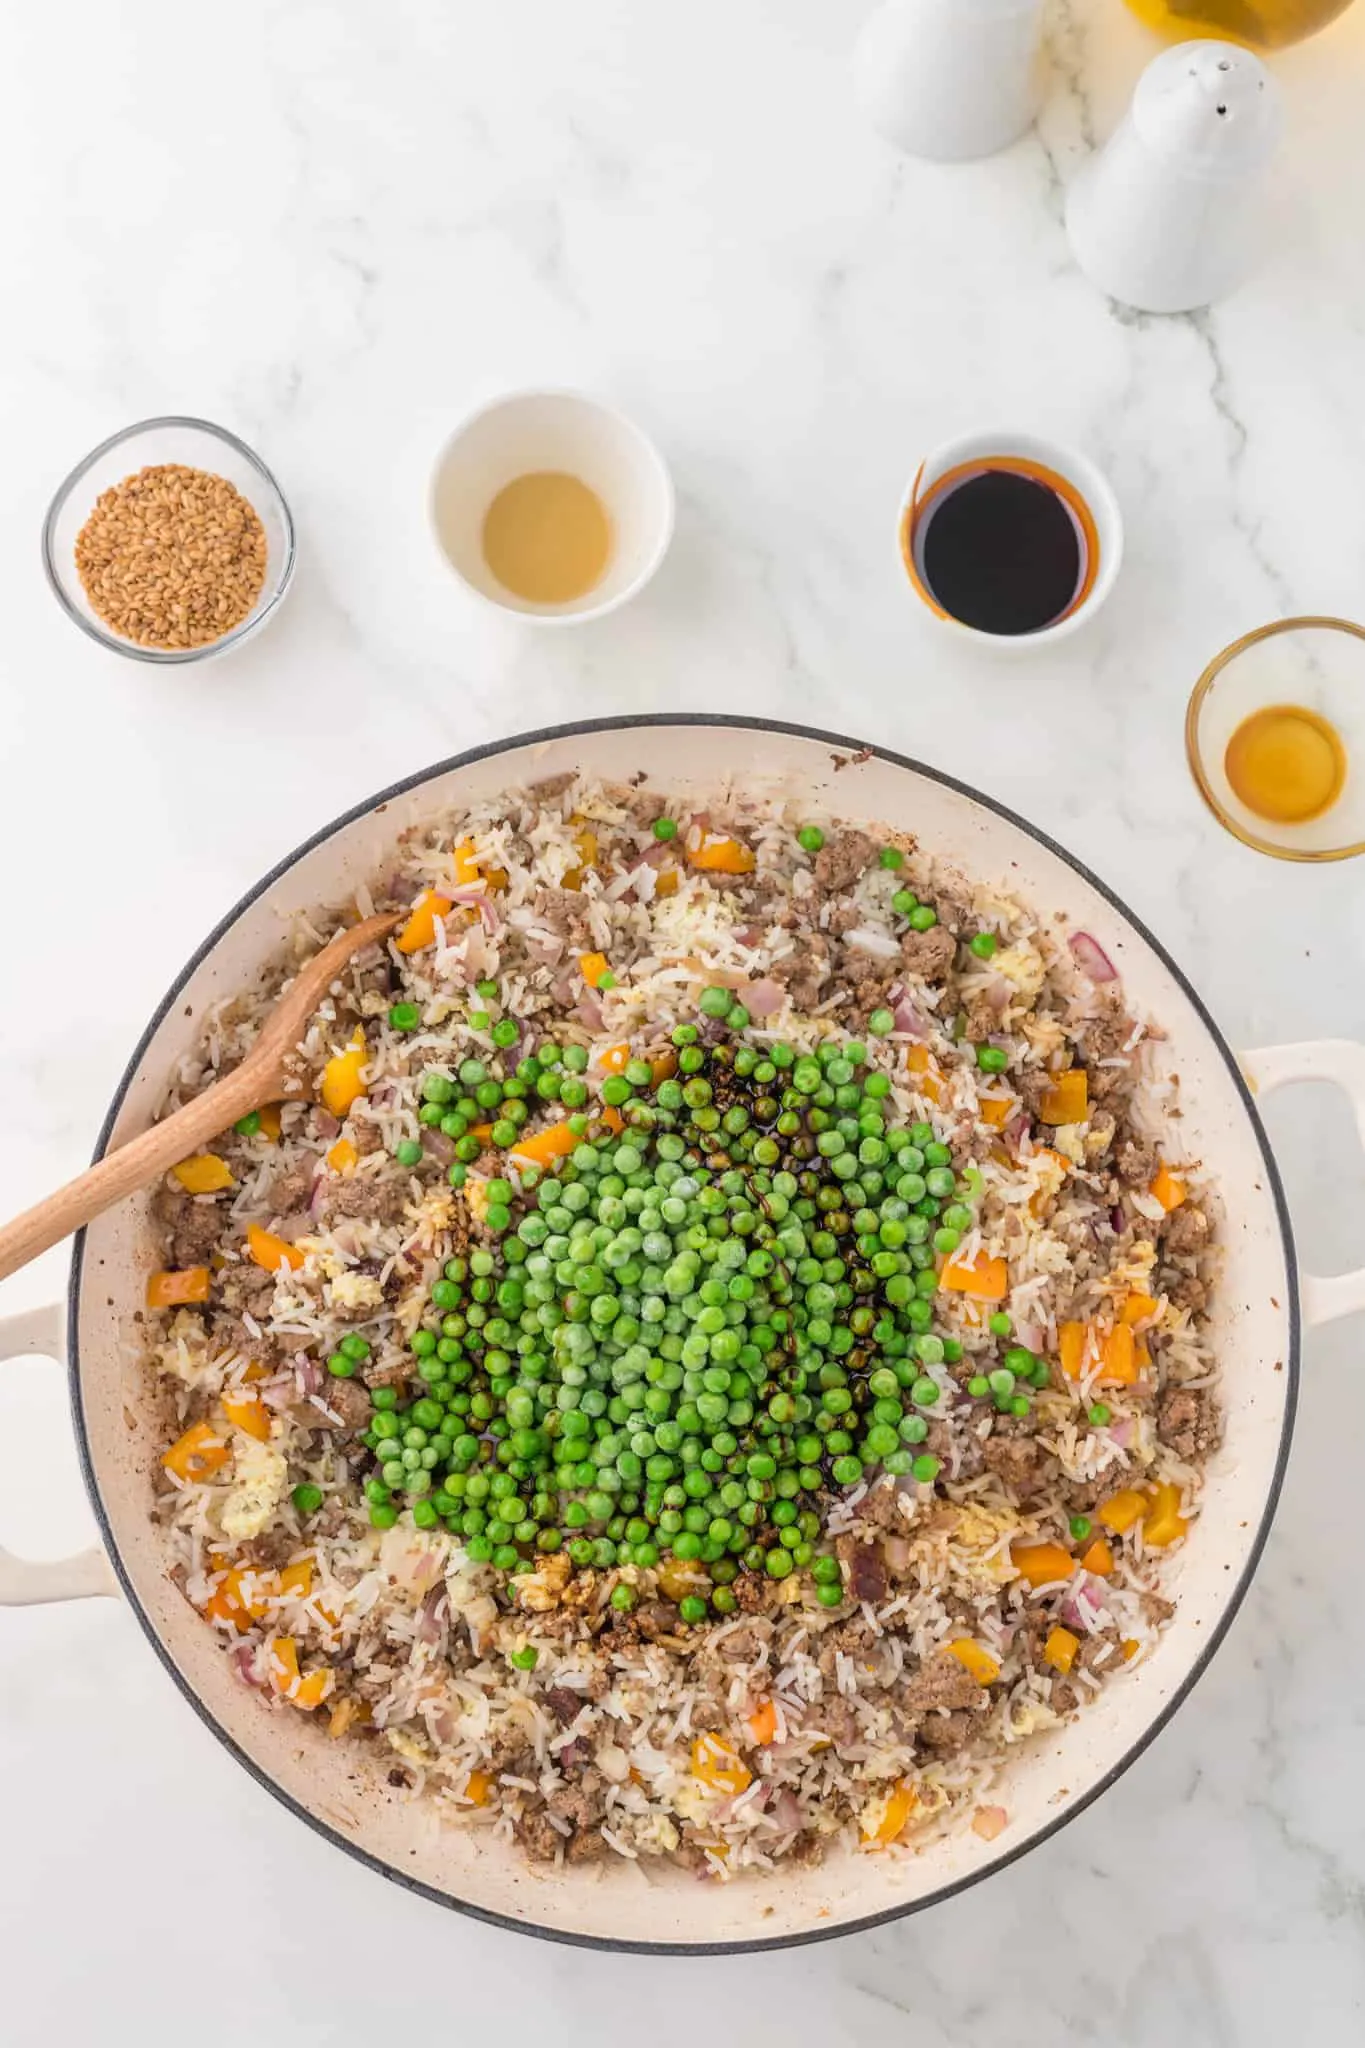 peas added to skillet with ground beef and rice